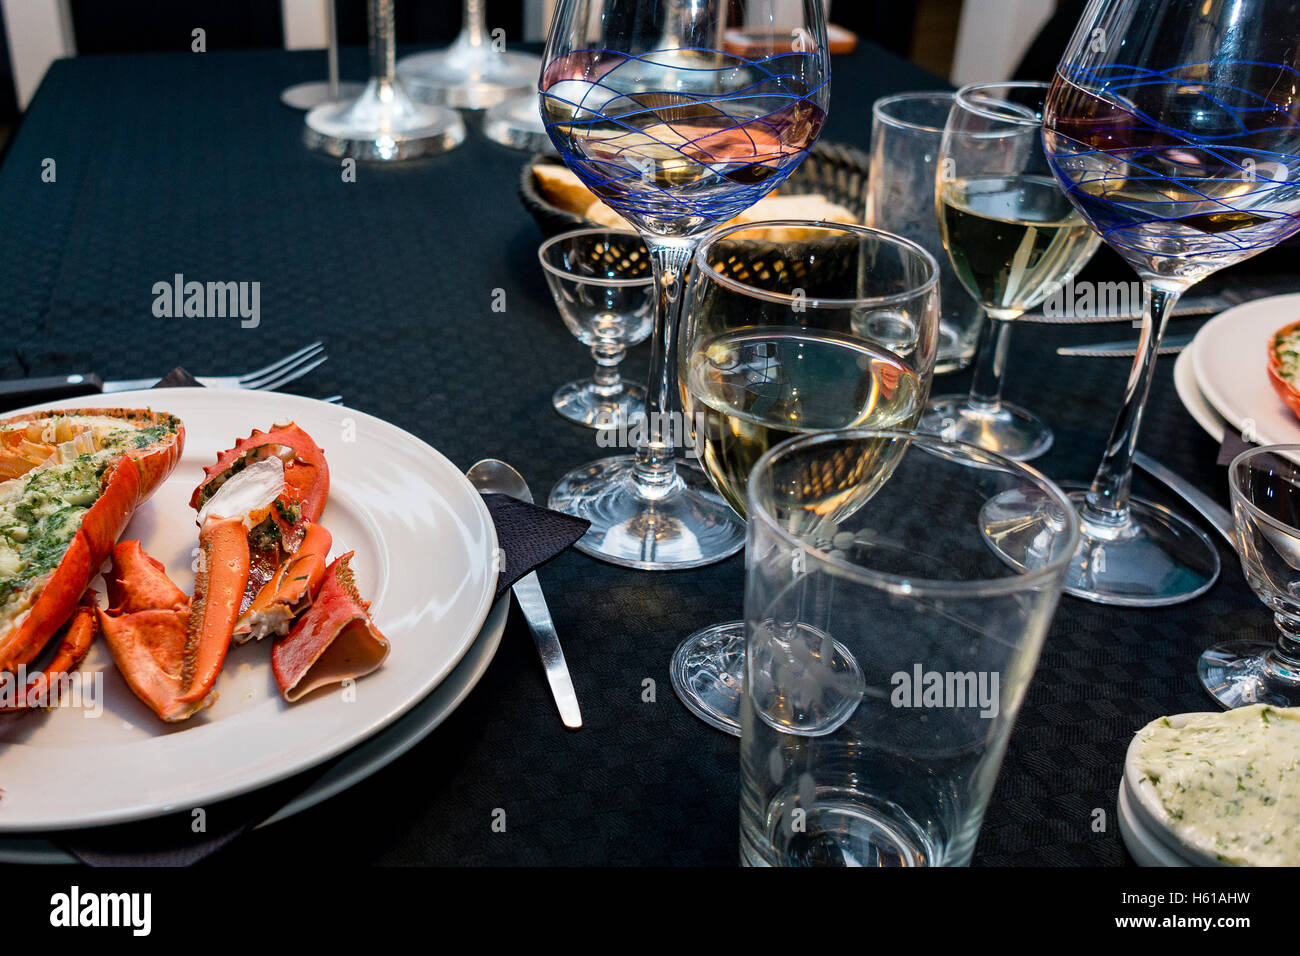 December 31, 2014. A lobster dinner on new years eve with wine glasses  set up on a black table Stock Photo